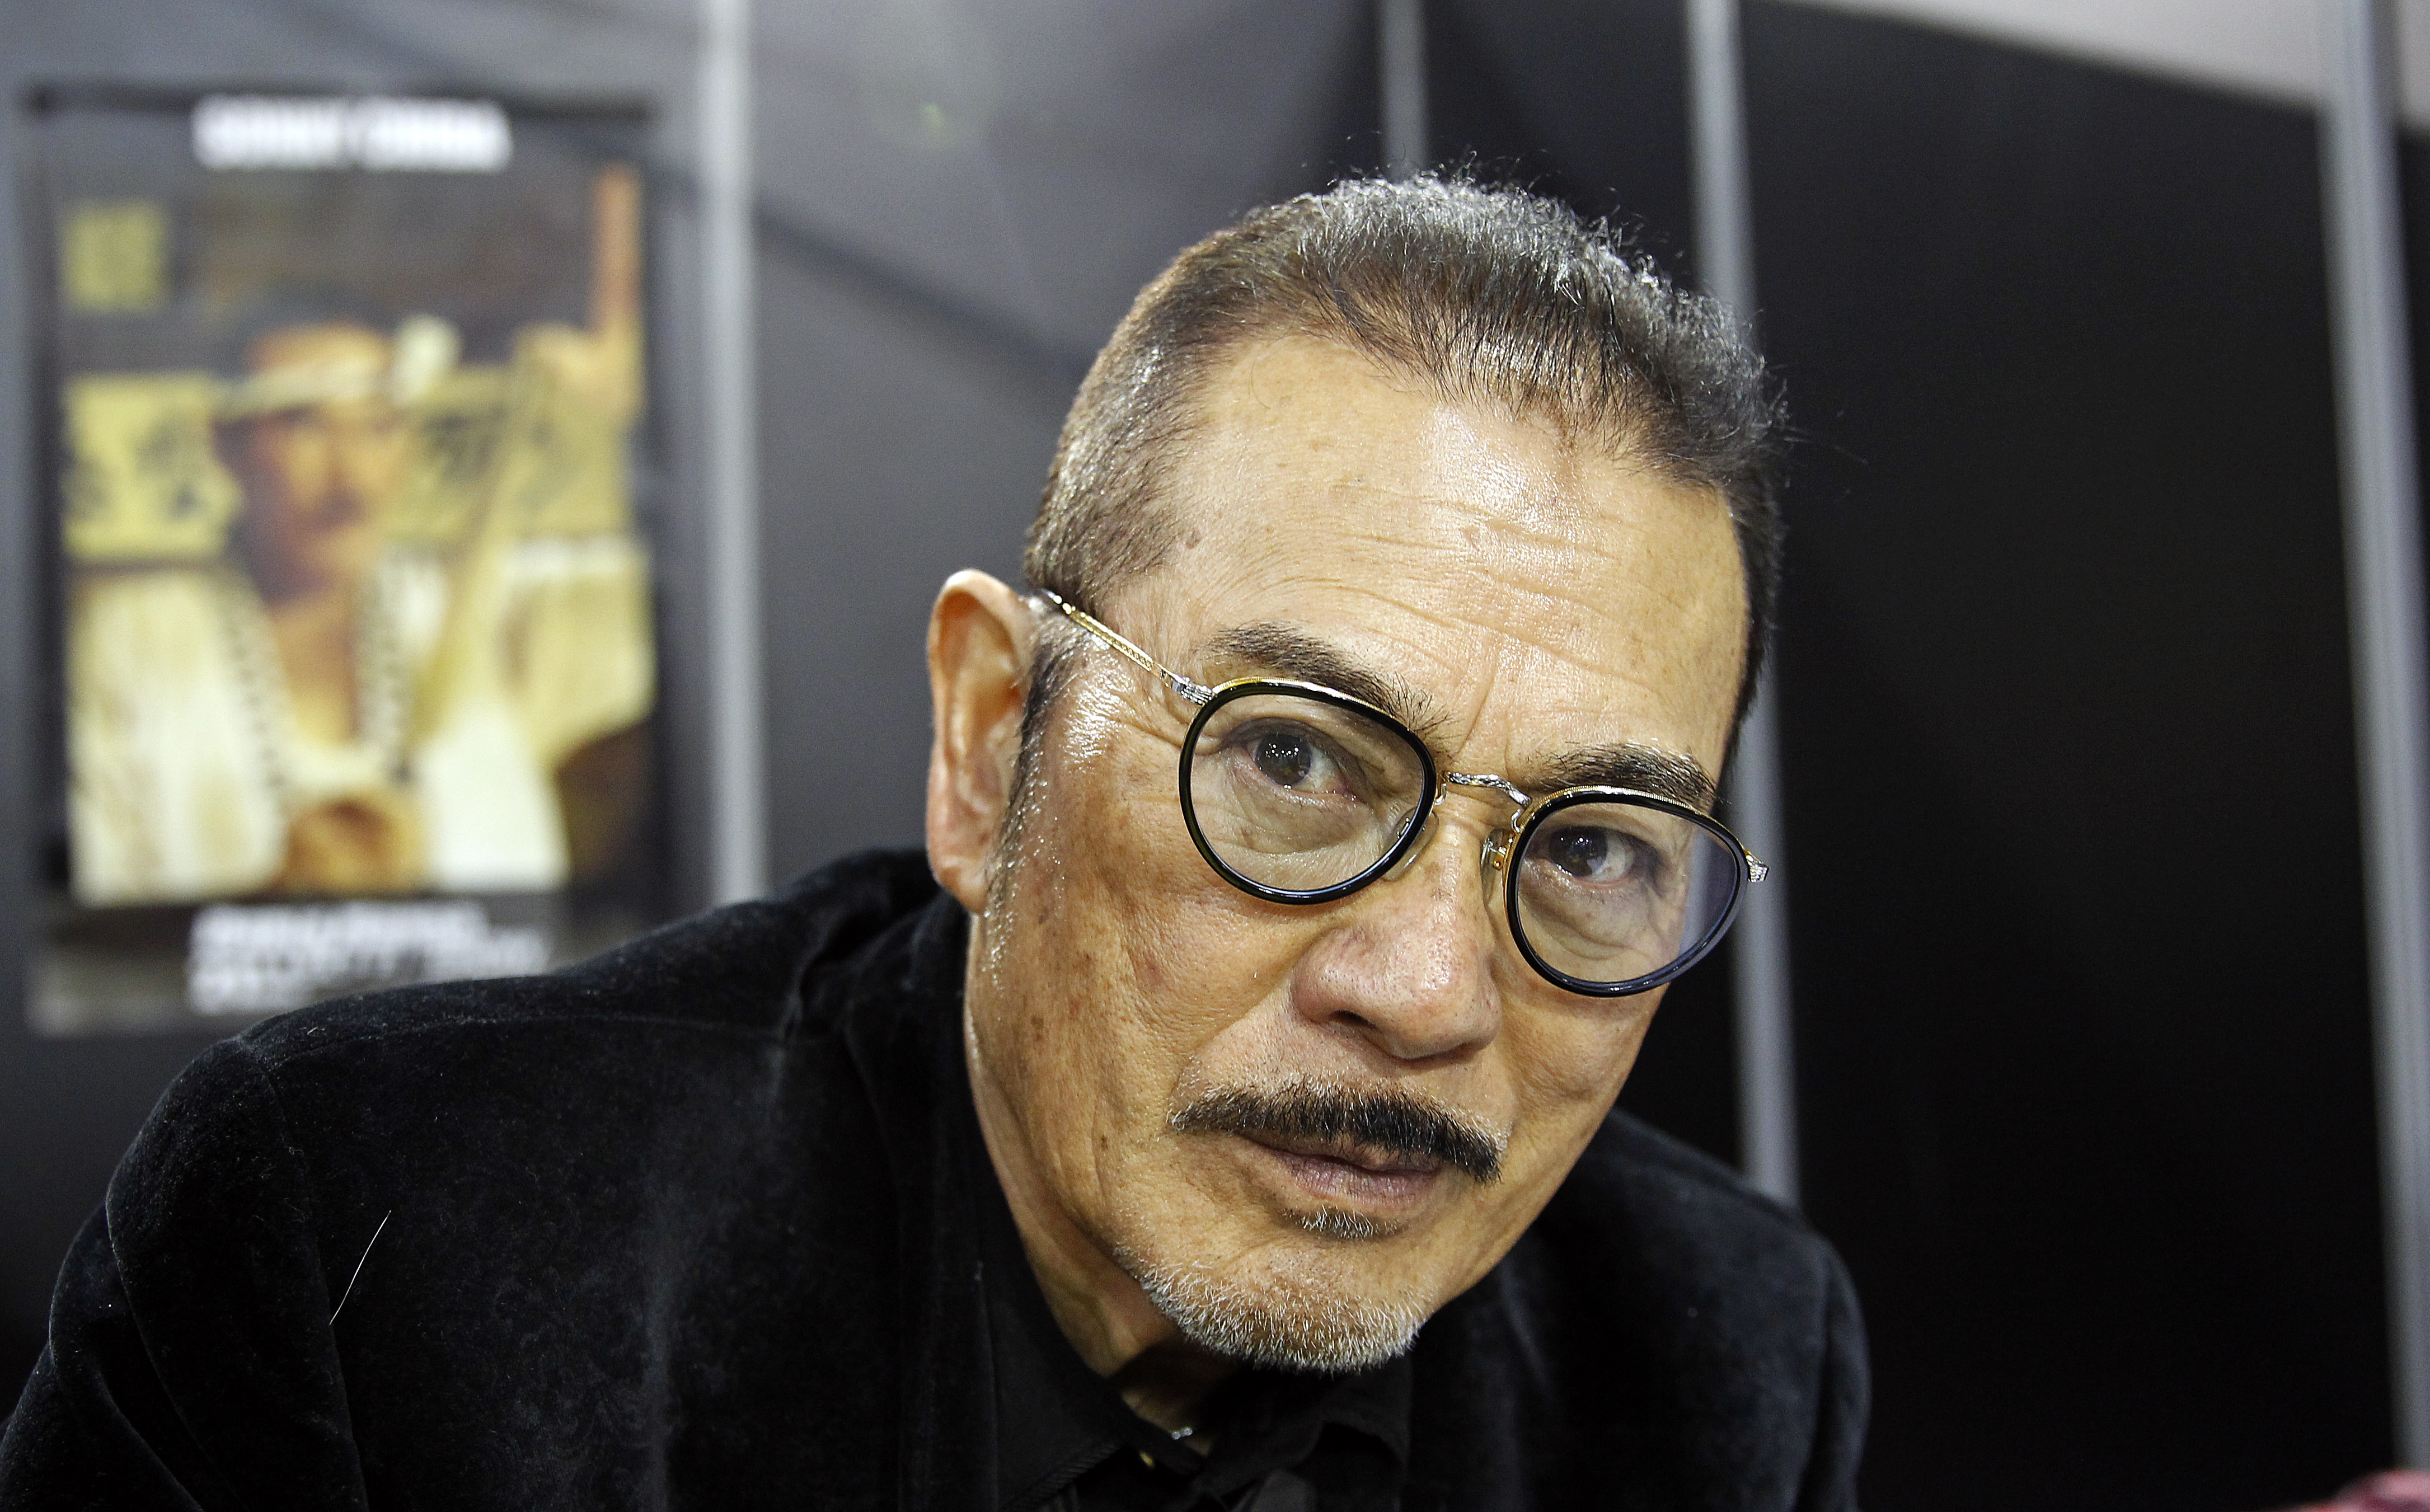 <p>On Aug. 19, 2021, Japanese actor and martial arts legend Shinichi "Sonny" Chiba -- who had memorable roles in movies including "The Street Fighter," "Kill Bill" and "The Fast and the Furious: Tokyo Drift" -- died from complications of COVID-19, his rep confirmed to <a href="https://variety.com/2021/film/news/sonny-chiba-dead-dies-martial-arts-kill-bill-1235044575/">Variety</a>. He was 82.</p>